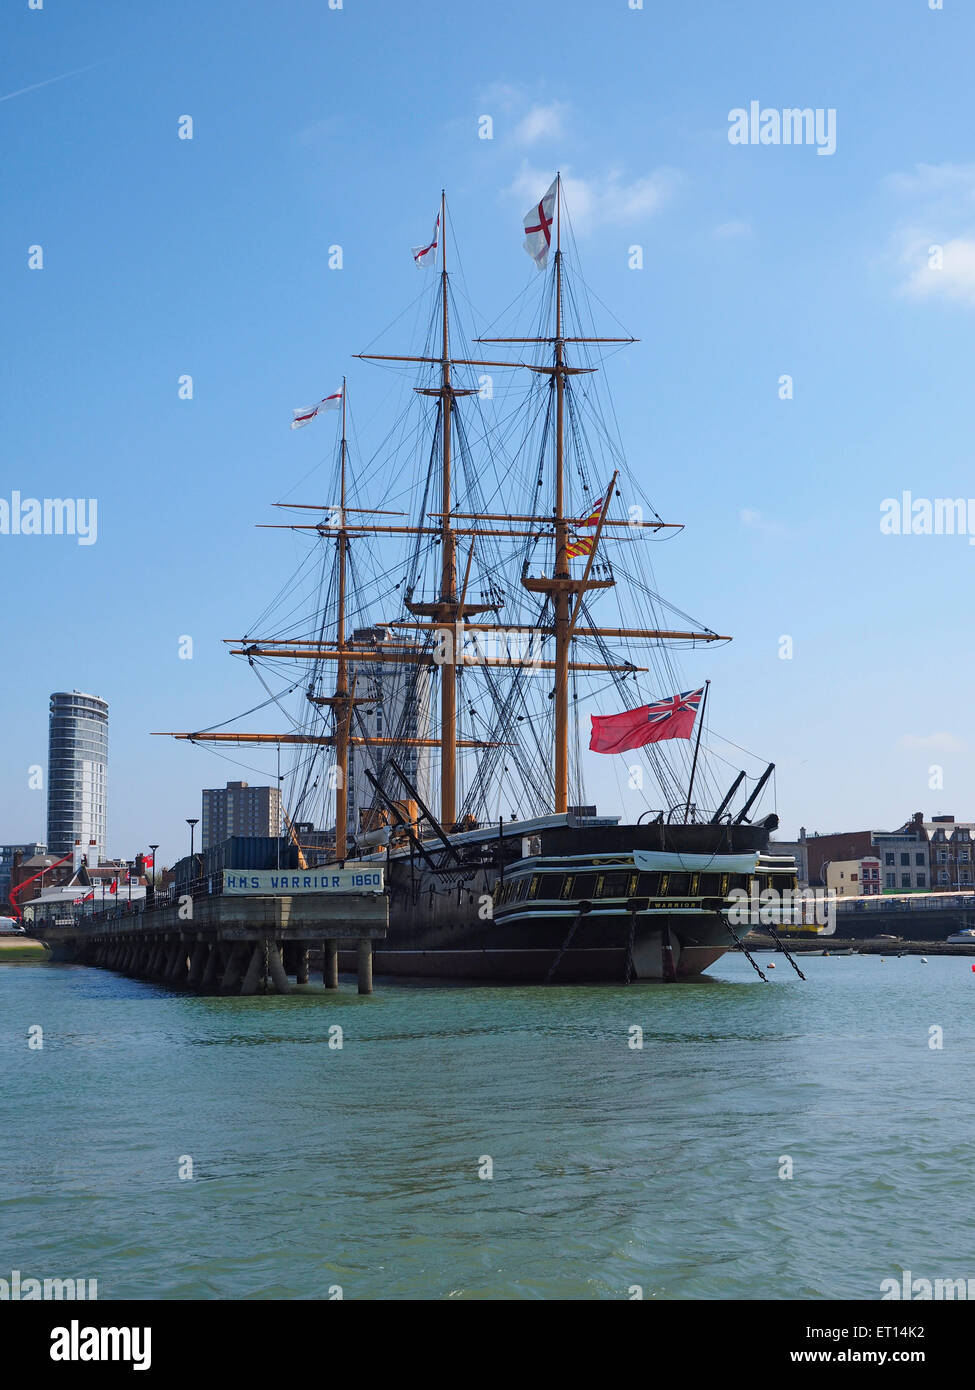 The Warrior steel hulled warship in Portsmouth Stock Photo